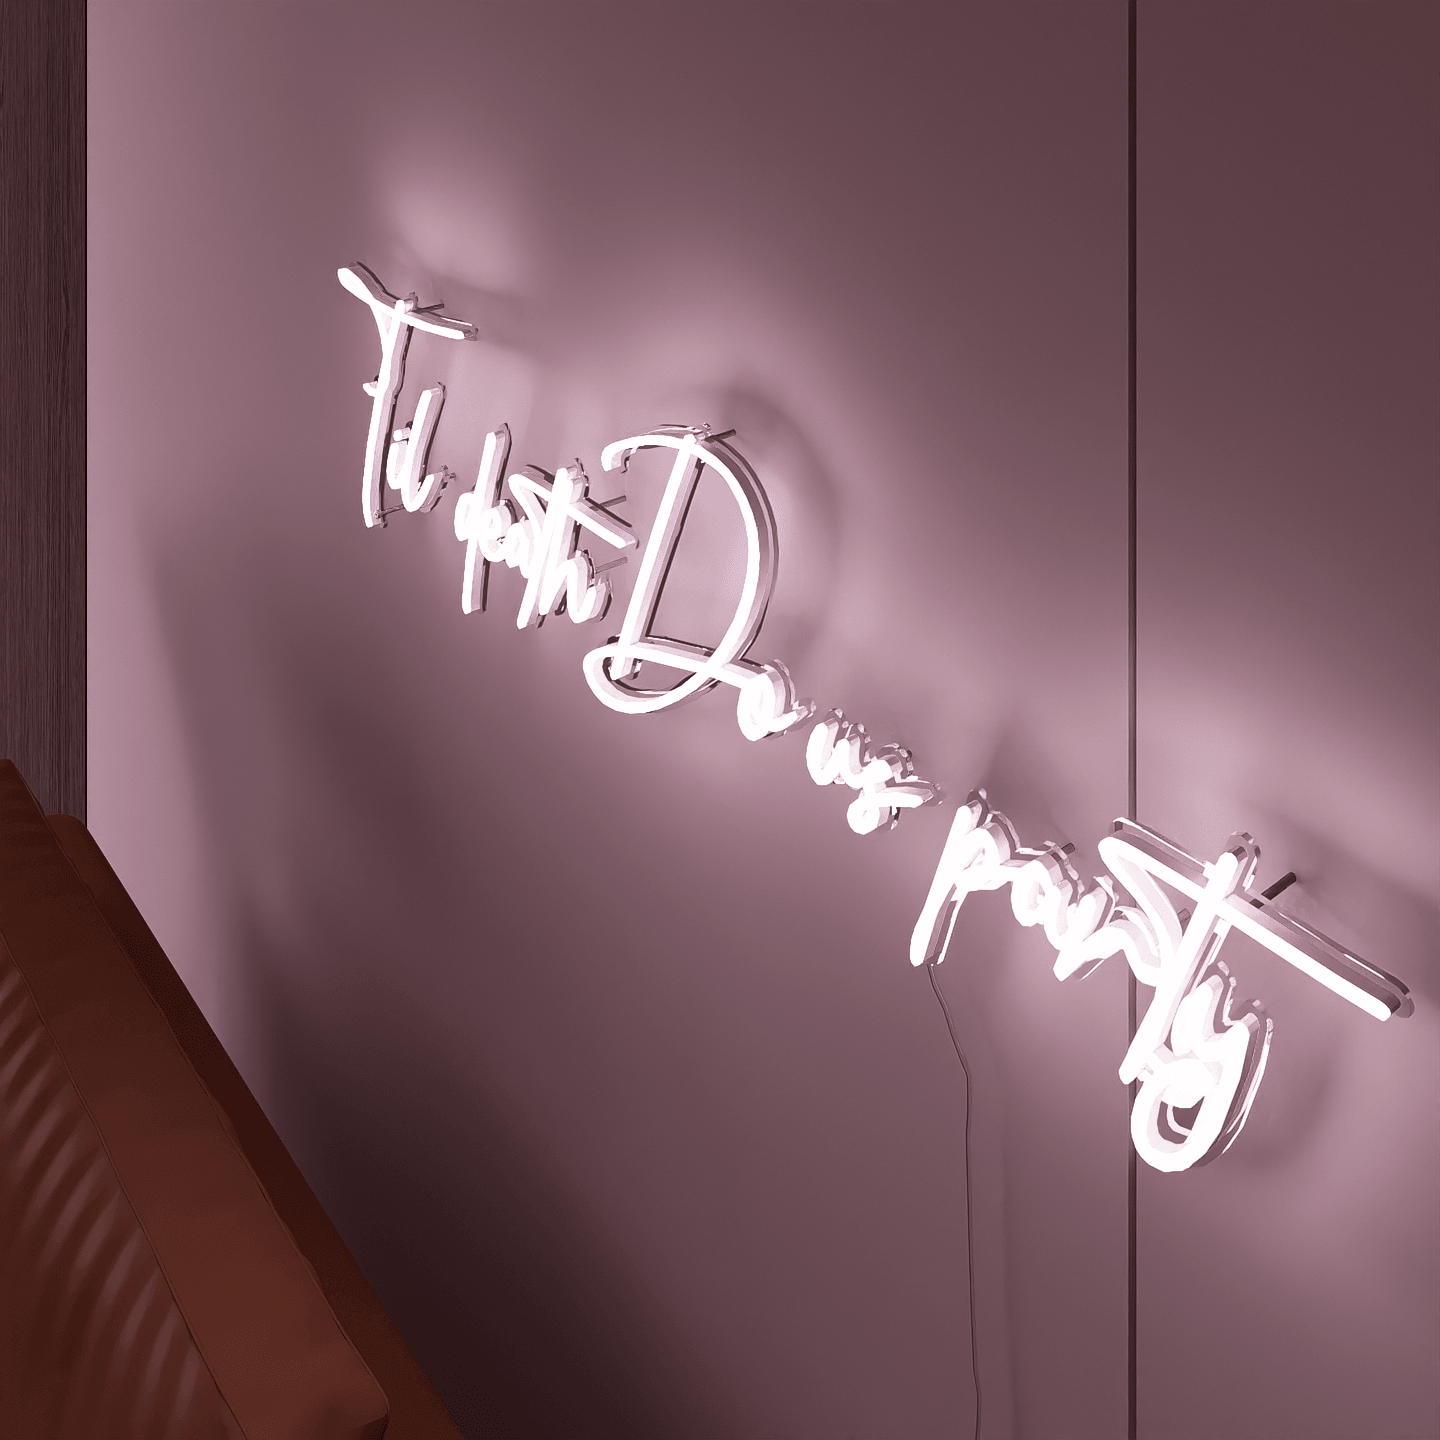 side-shot-of-illuminated-white-neon-sign-hanging-on-the-wall-at-night-til-death-do-us-party